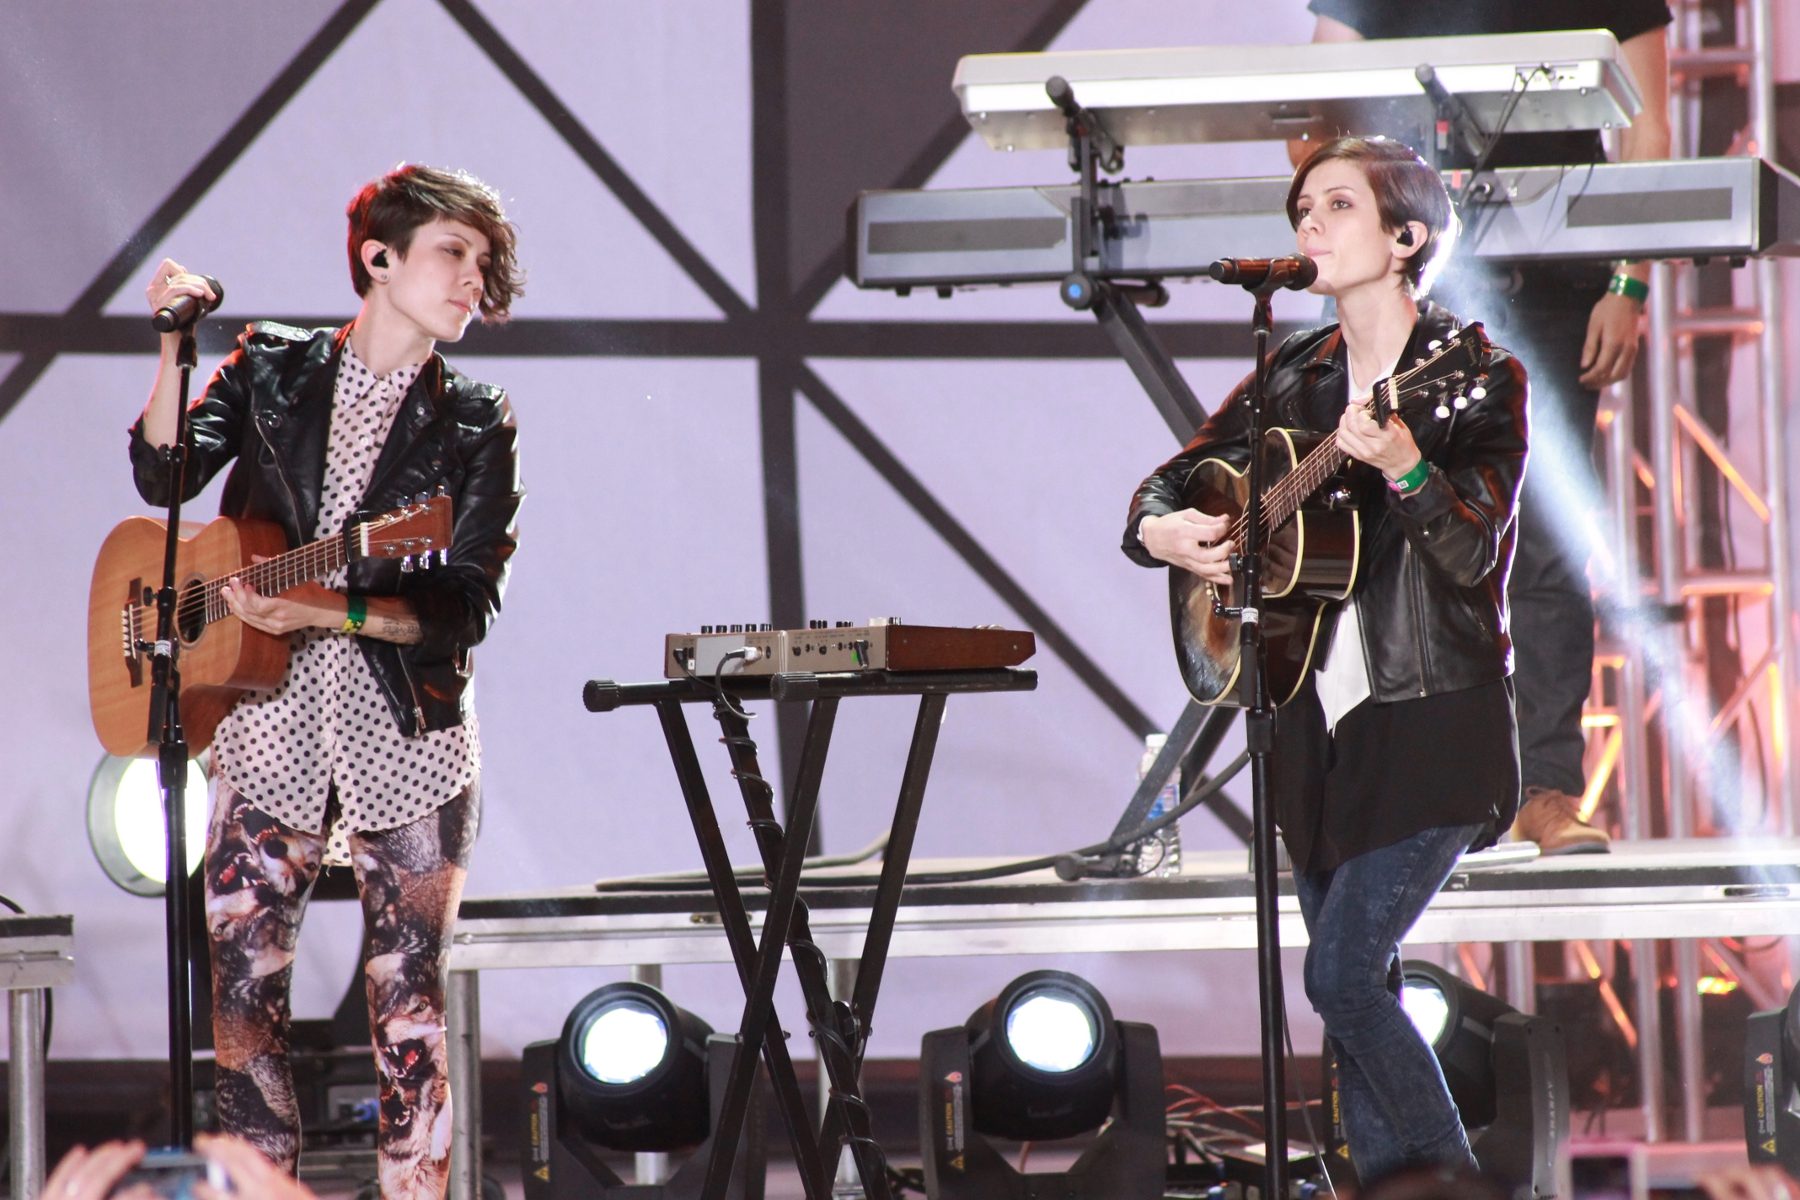 Tegan And Sara Reinvent Recently-Discovered High School Era Songs on New Album Hey I’m Just Like You